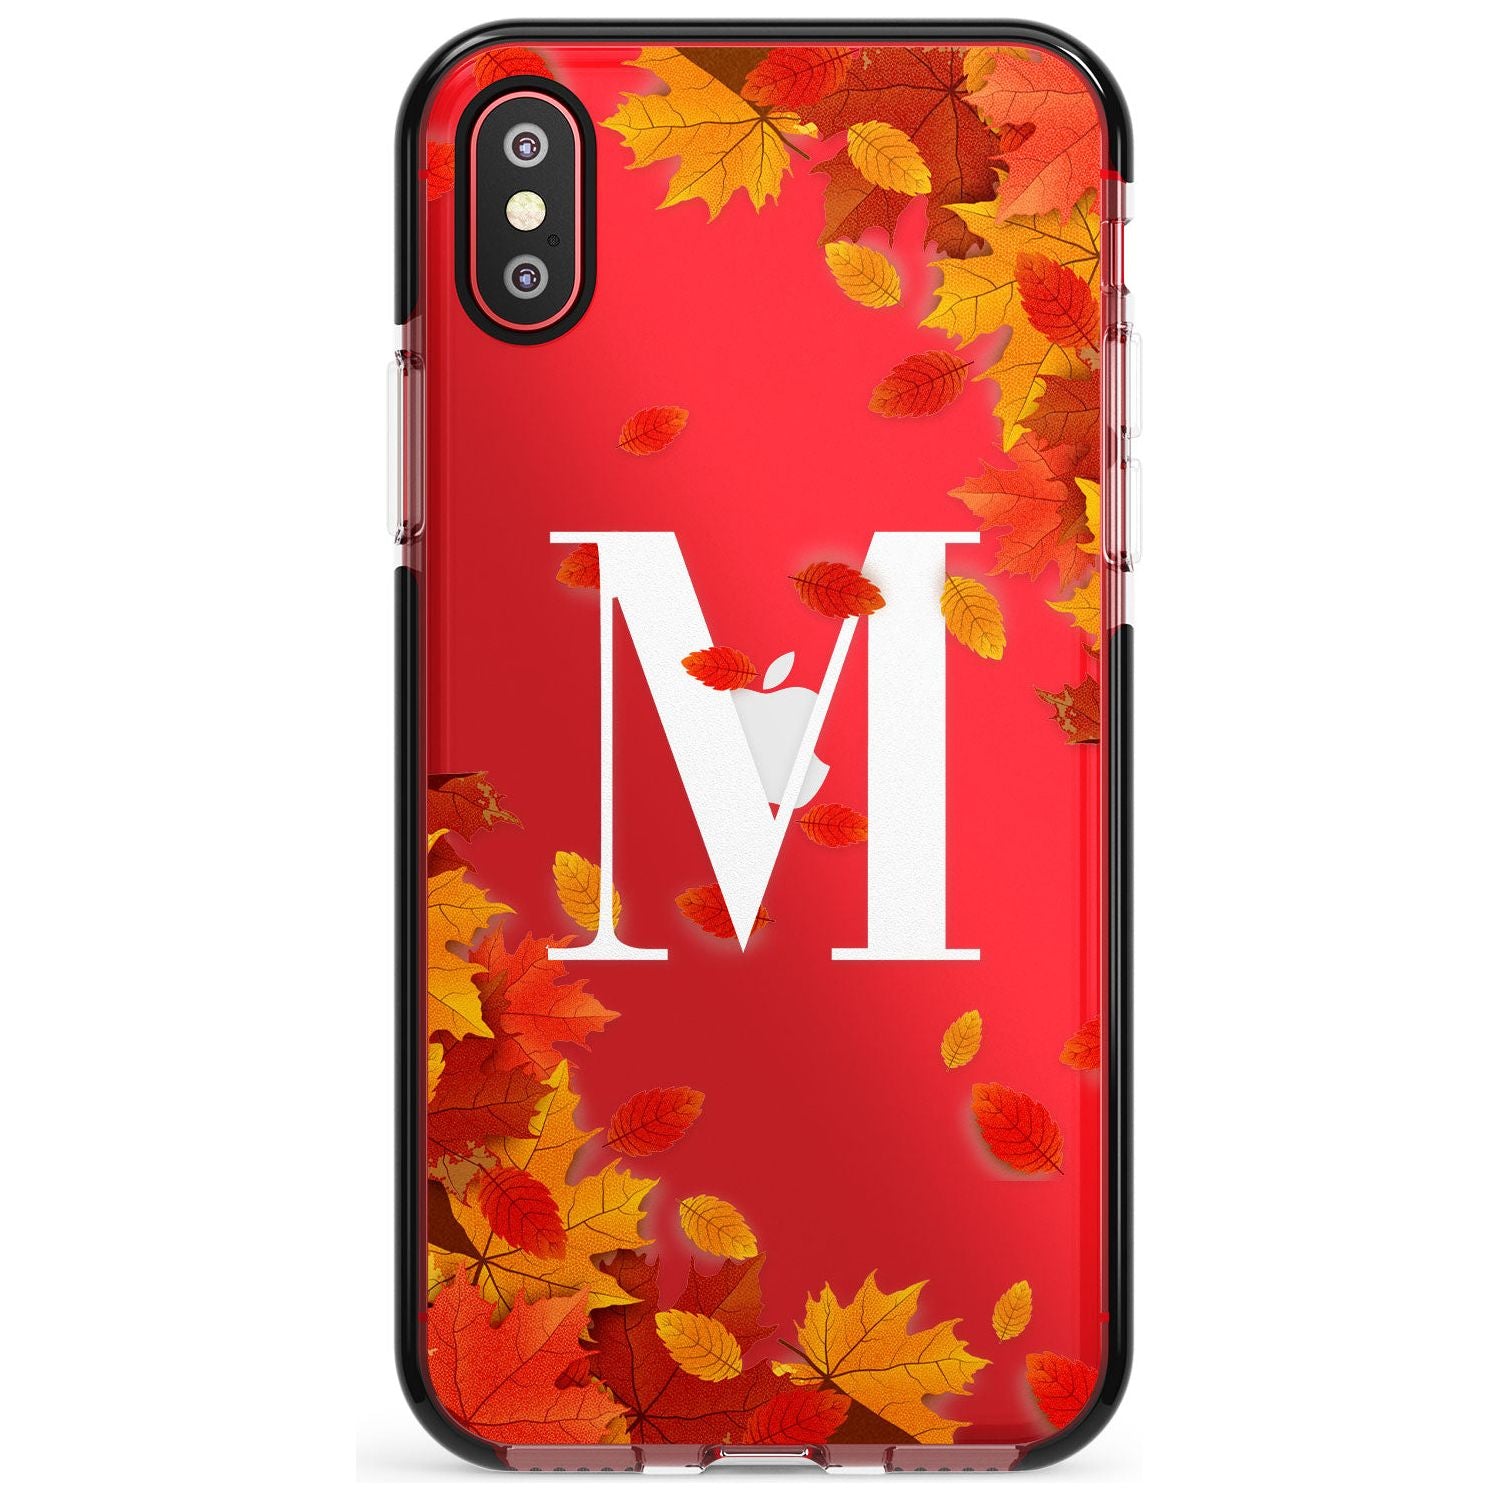 Personalised Monogram Autumn Leaves Black Impact Phone Case for iPhone X XS Max XR